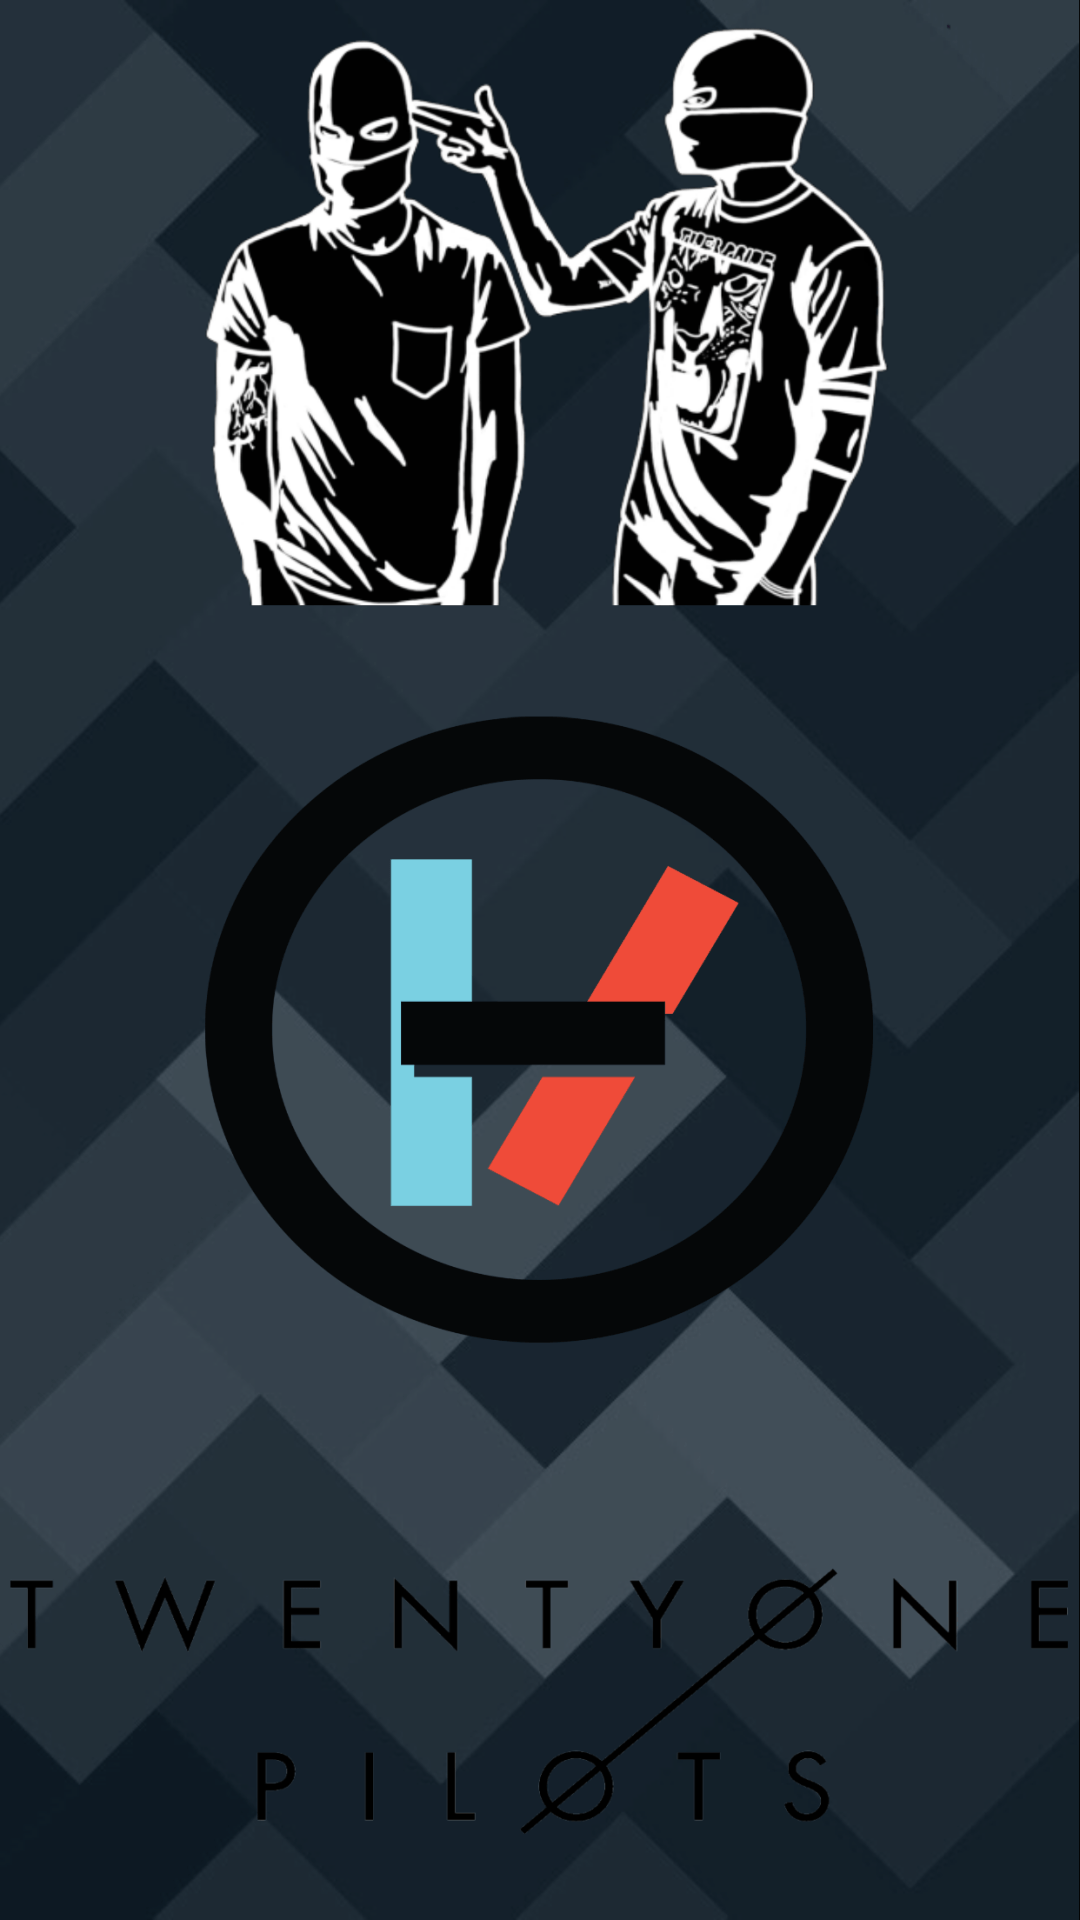 Twenty One Pilots Wallpapers for Iphone 7, Iphone 7 plus, Iphone 6